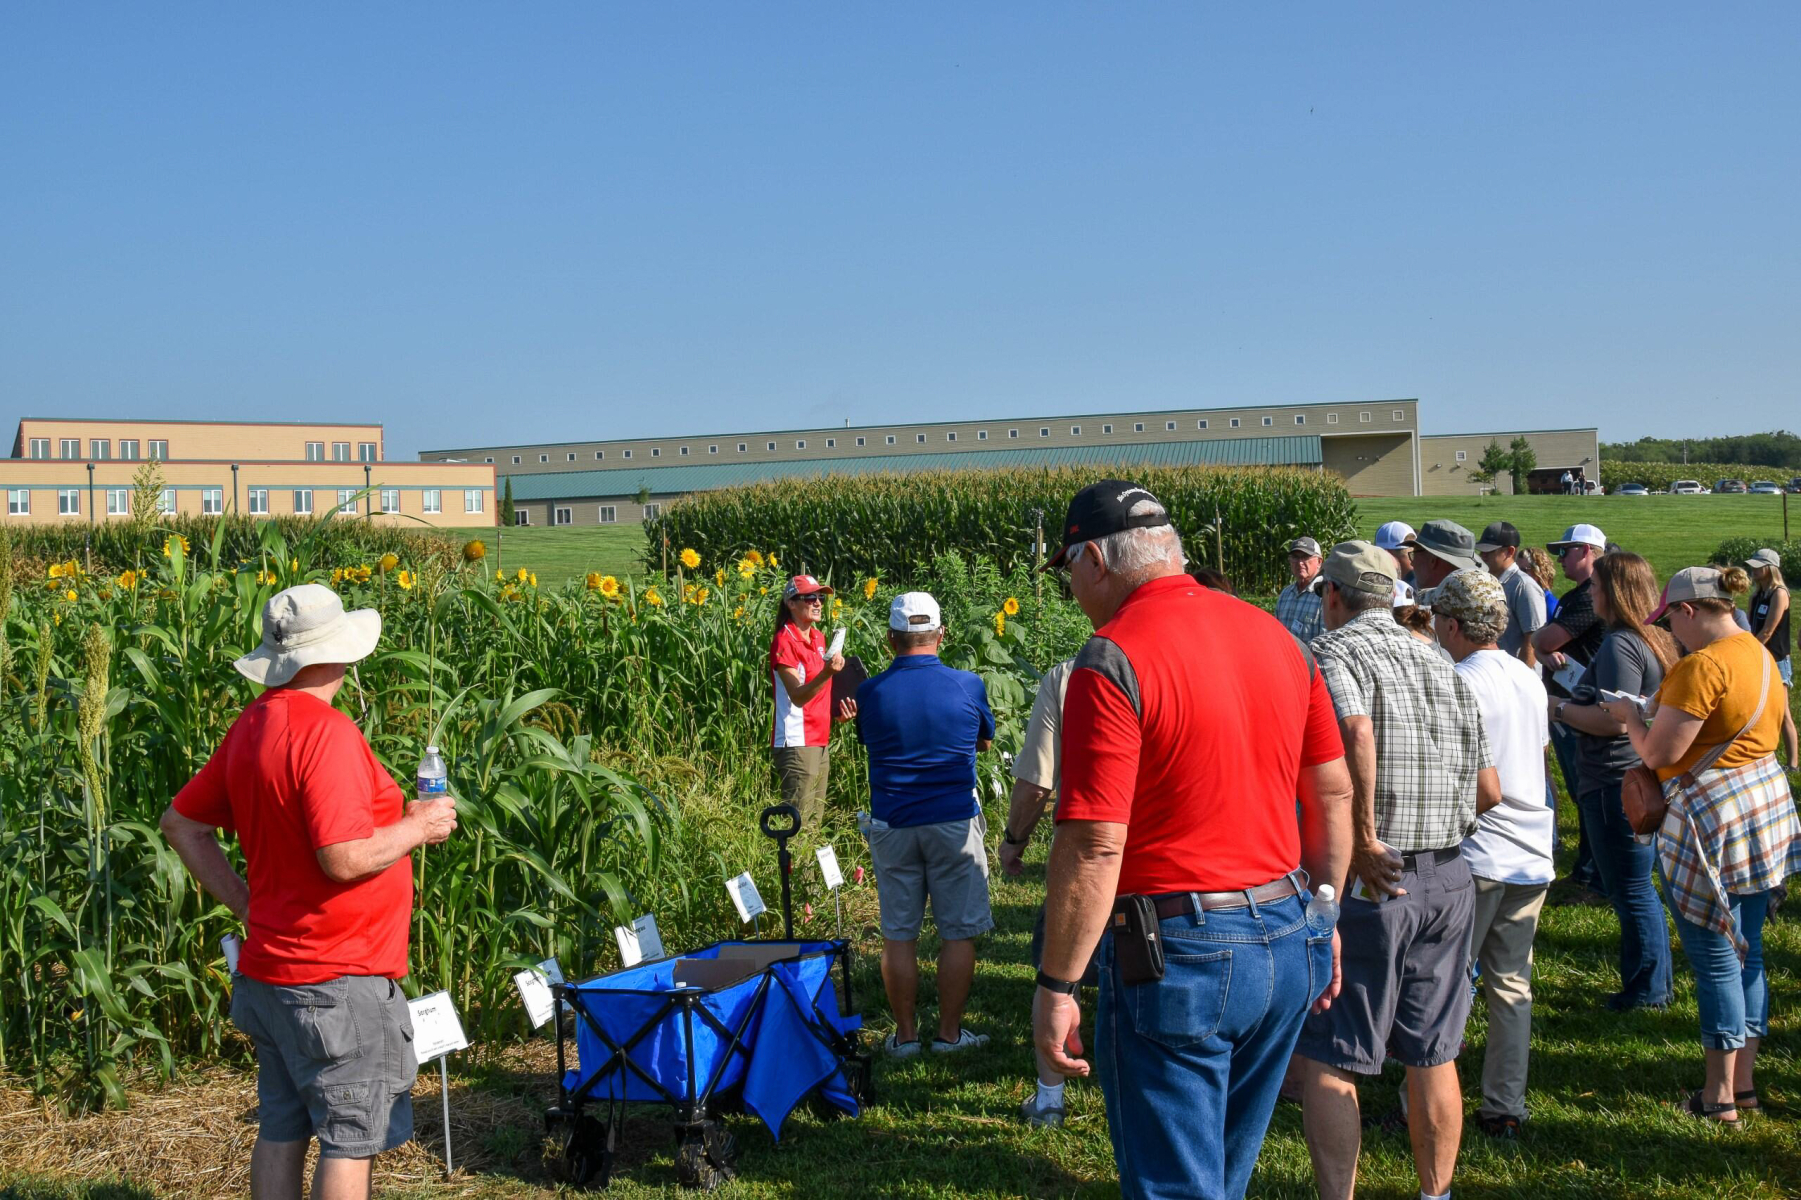 Cover Crops, Interseeding, and Soil Health Field Day